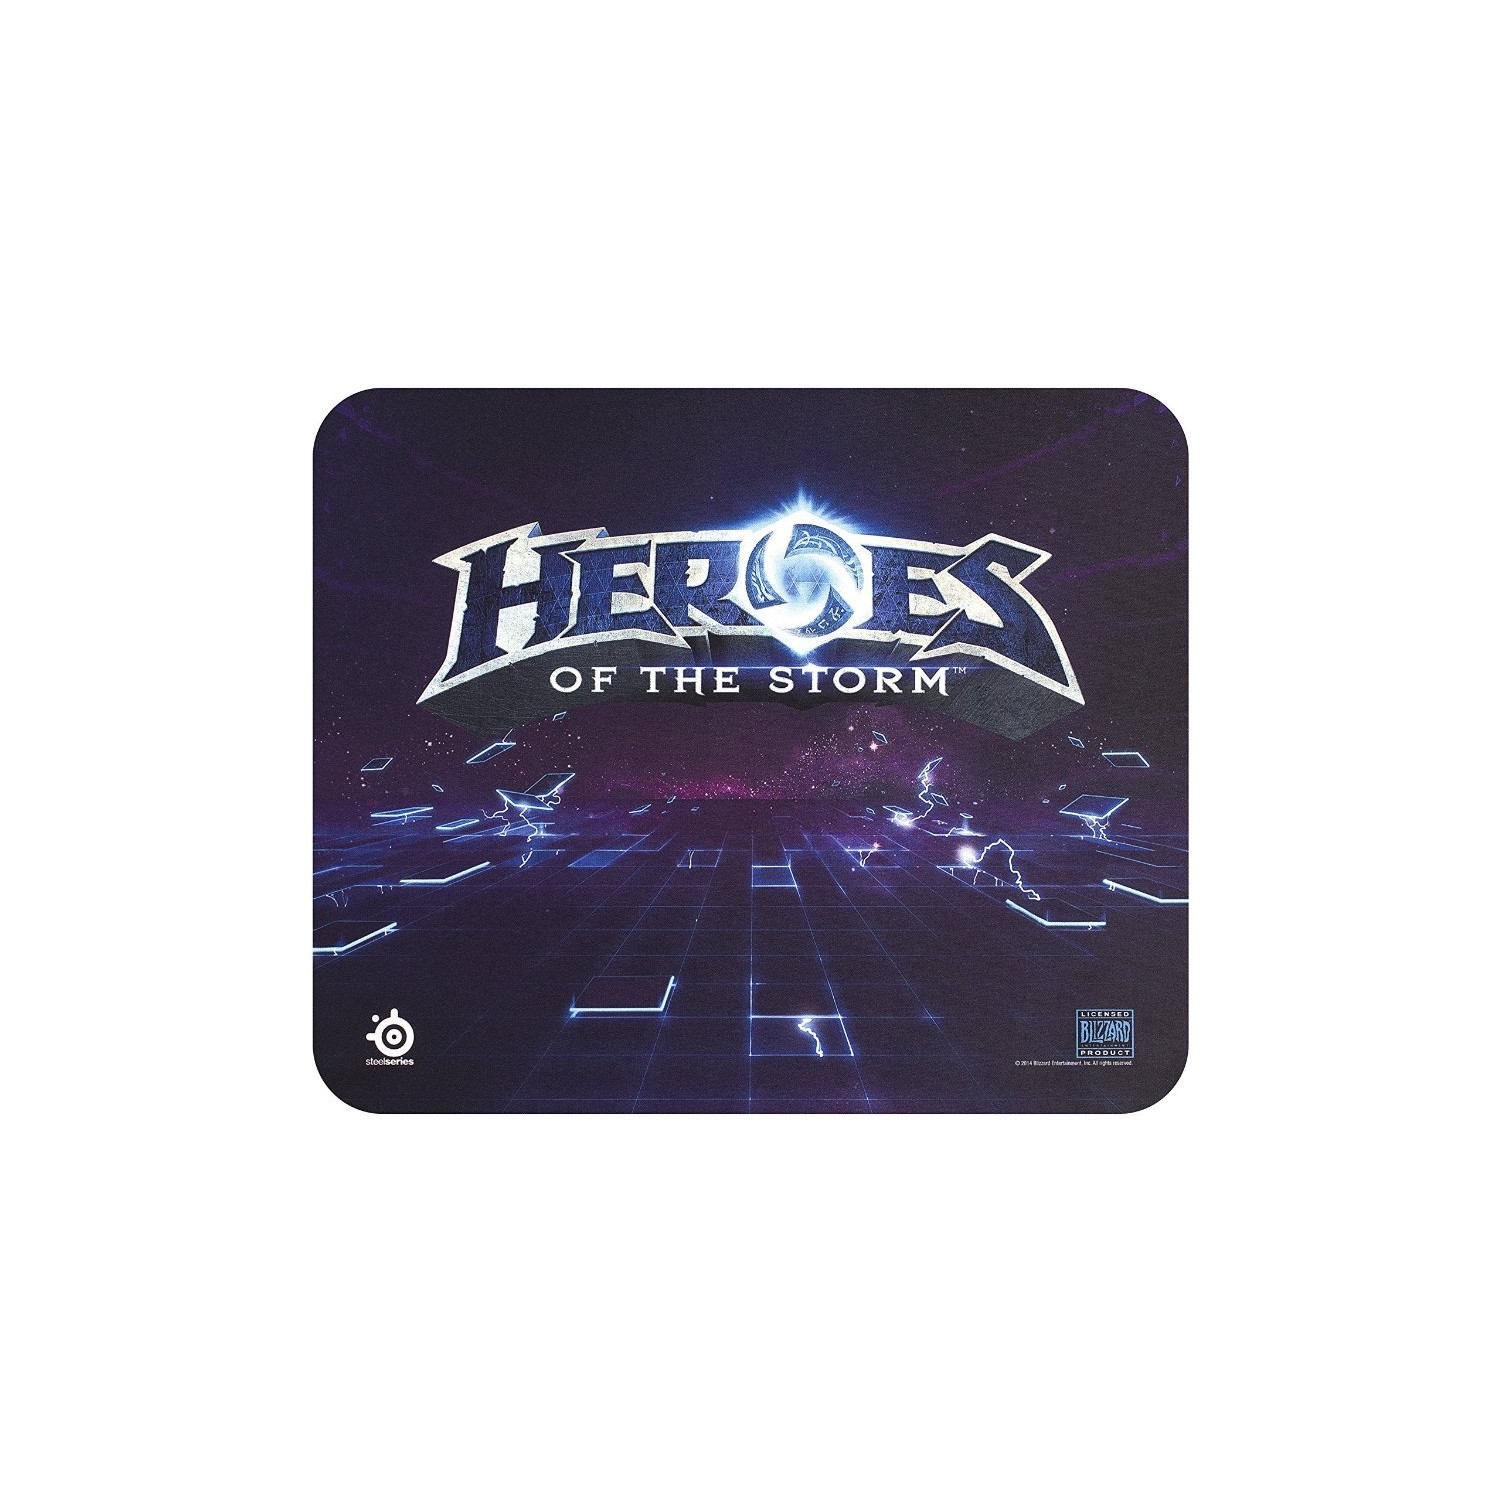  Steelseries Qck Heroes of the Storm Mouse pad-4